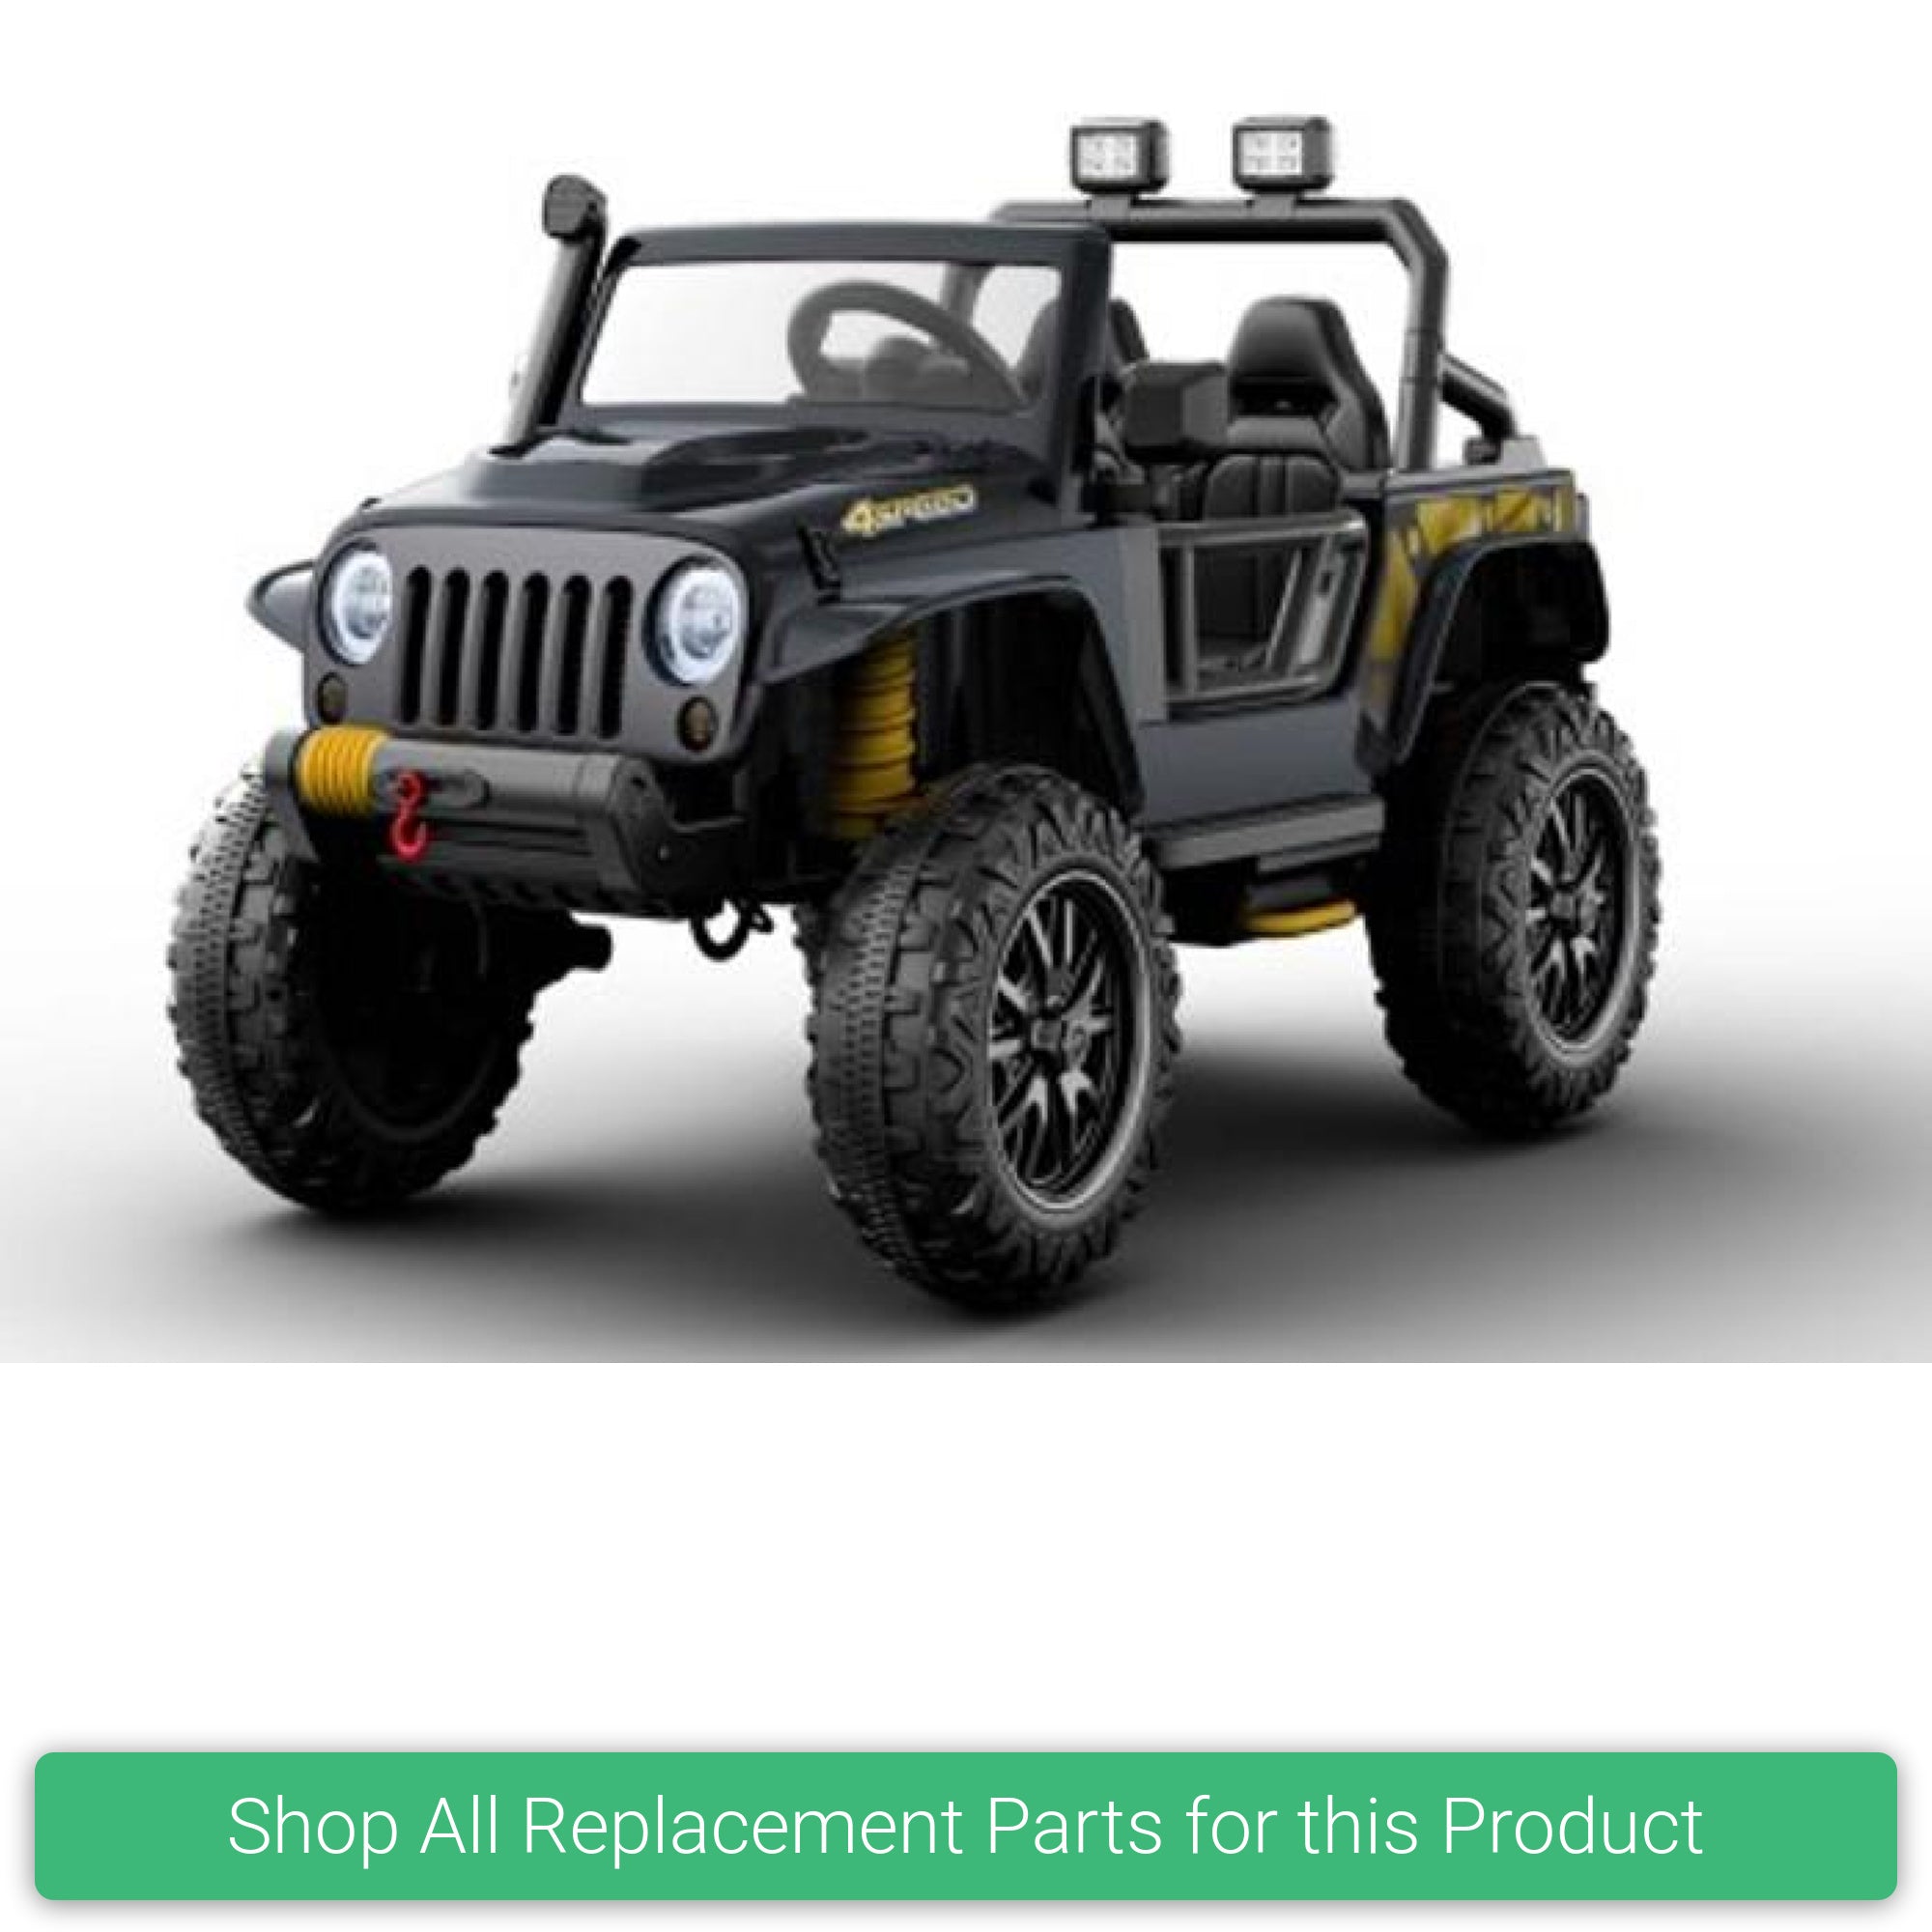 Replacement Parts and Spares for Kids Jeep Style 2021 - JJ-21-VARI - XB-1118